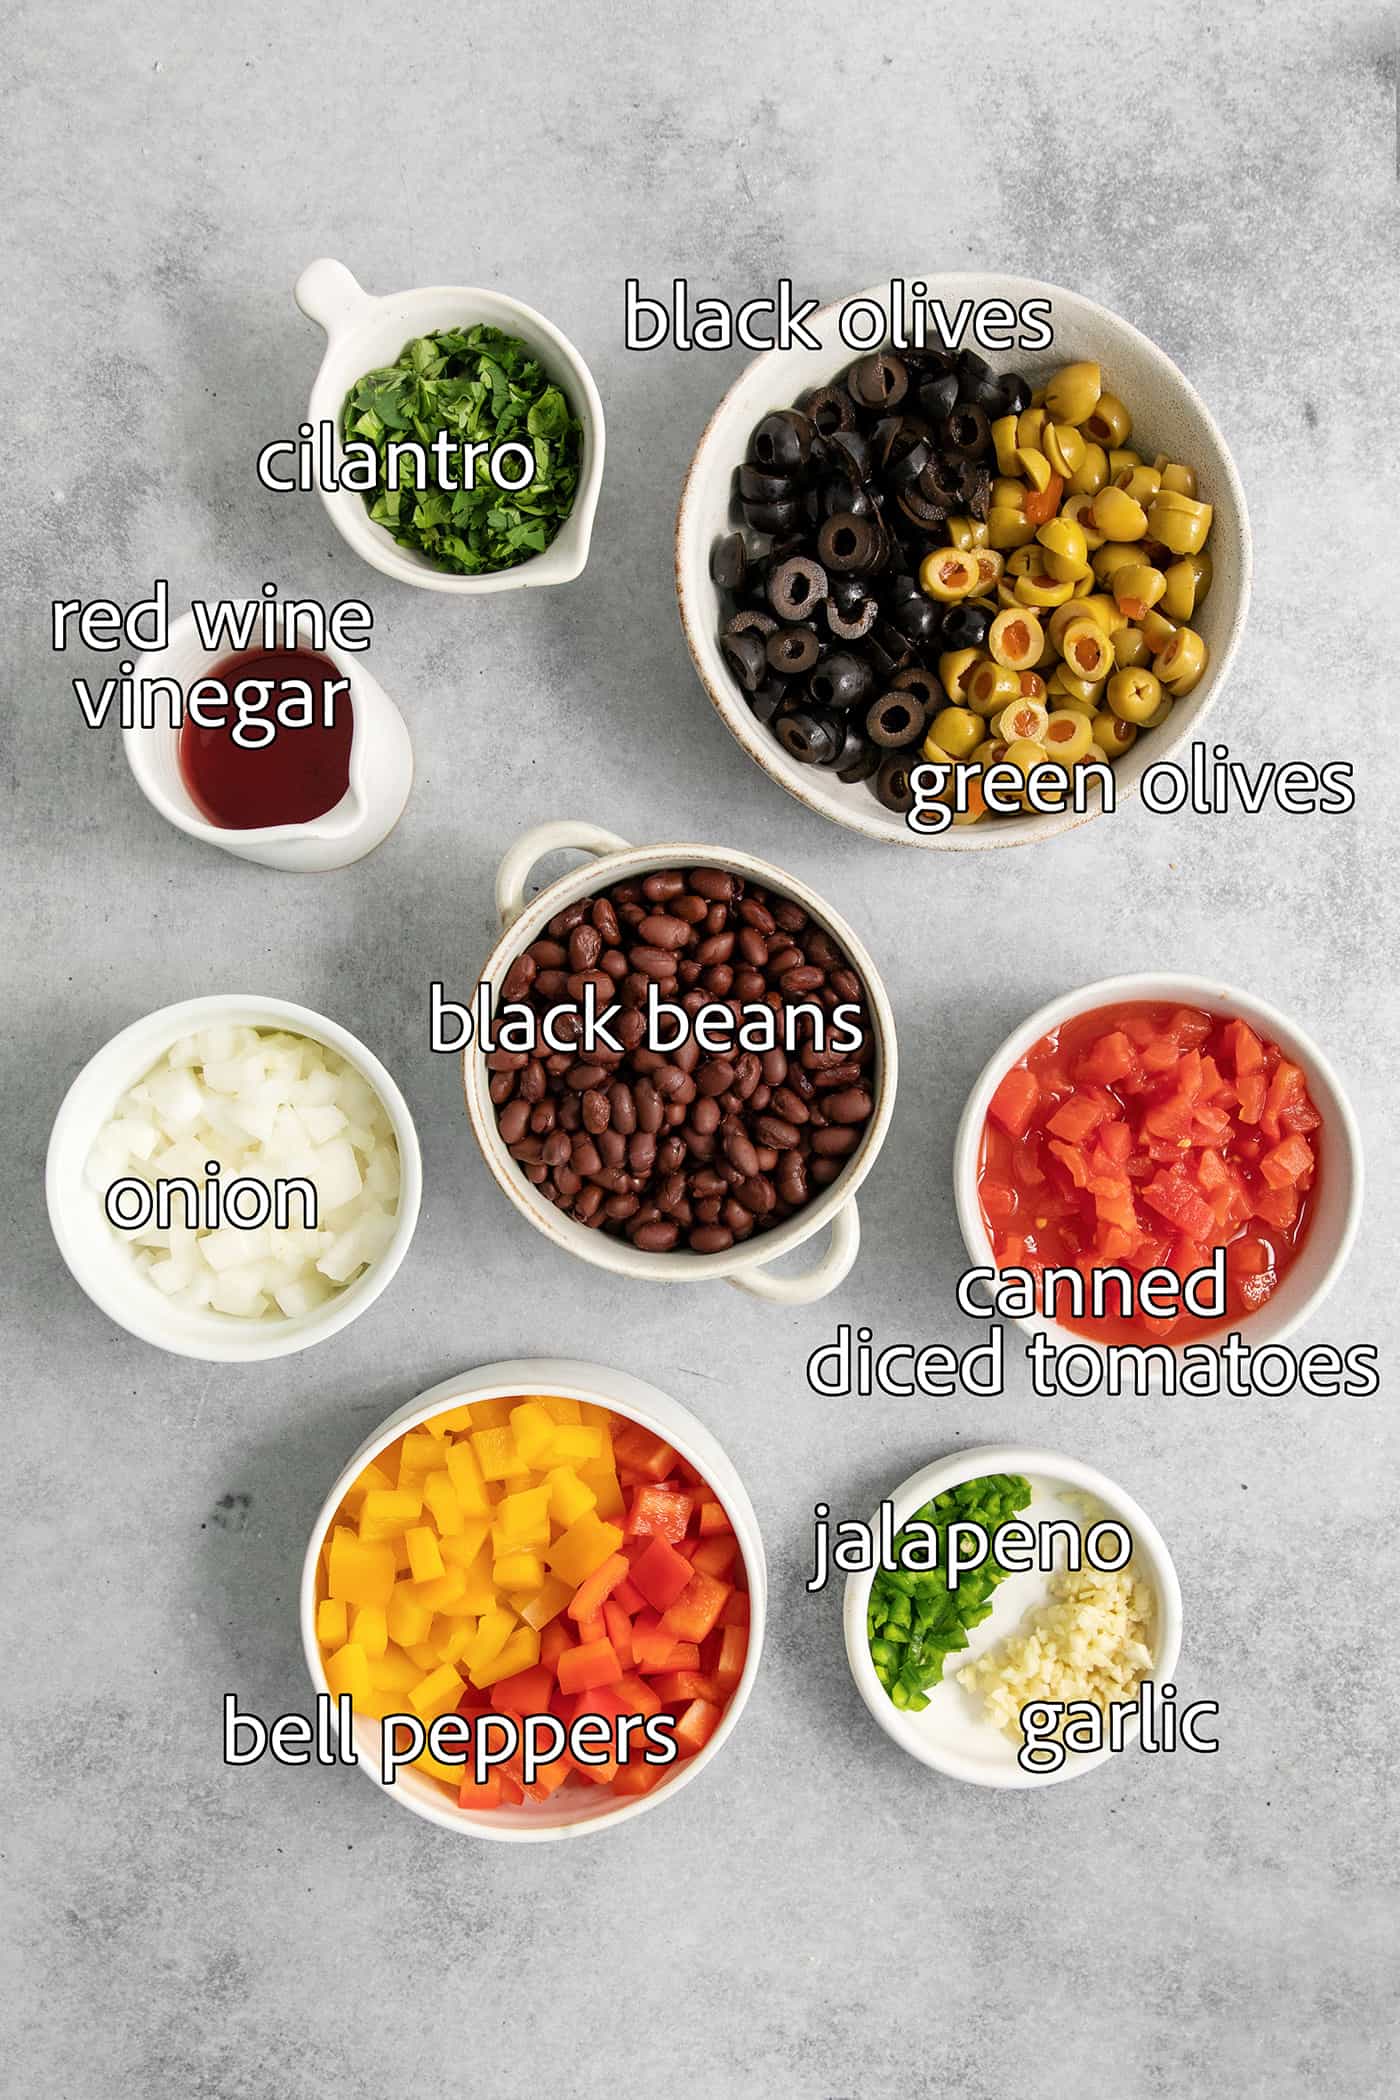 Ingredients for black bean salsa are portioned out and labeled: black beans, olives, onion, vinegar, cilantro, canned tomatoes, garlic, cilantro.